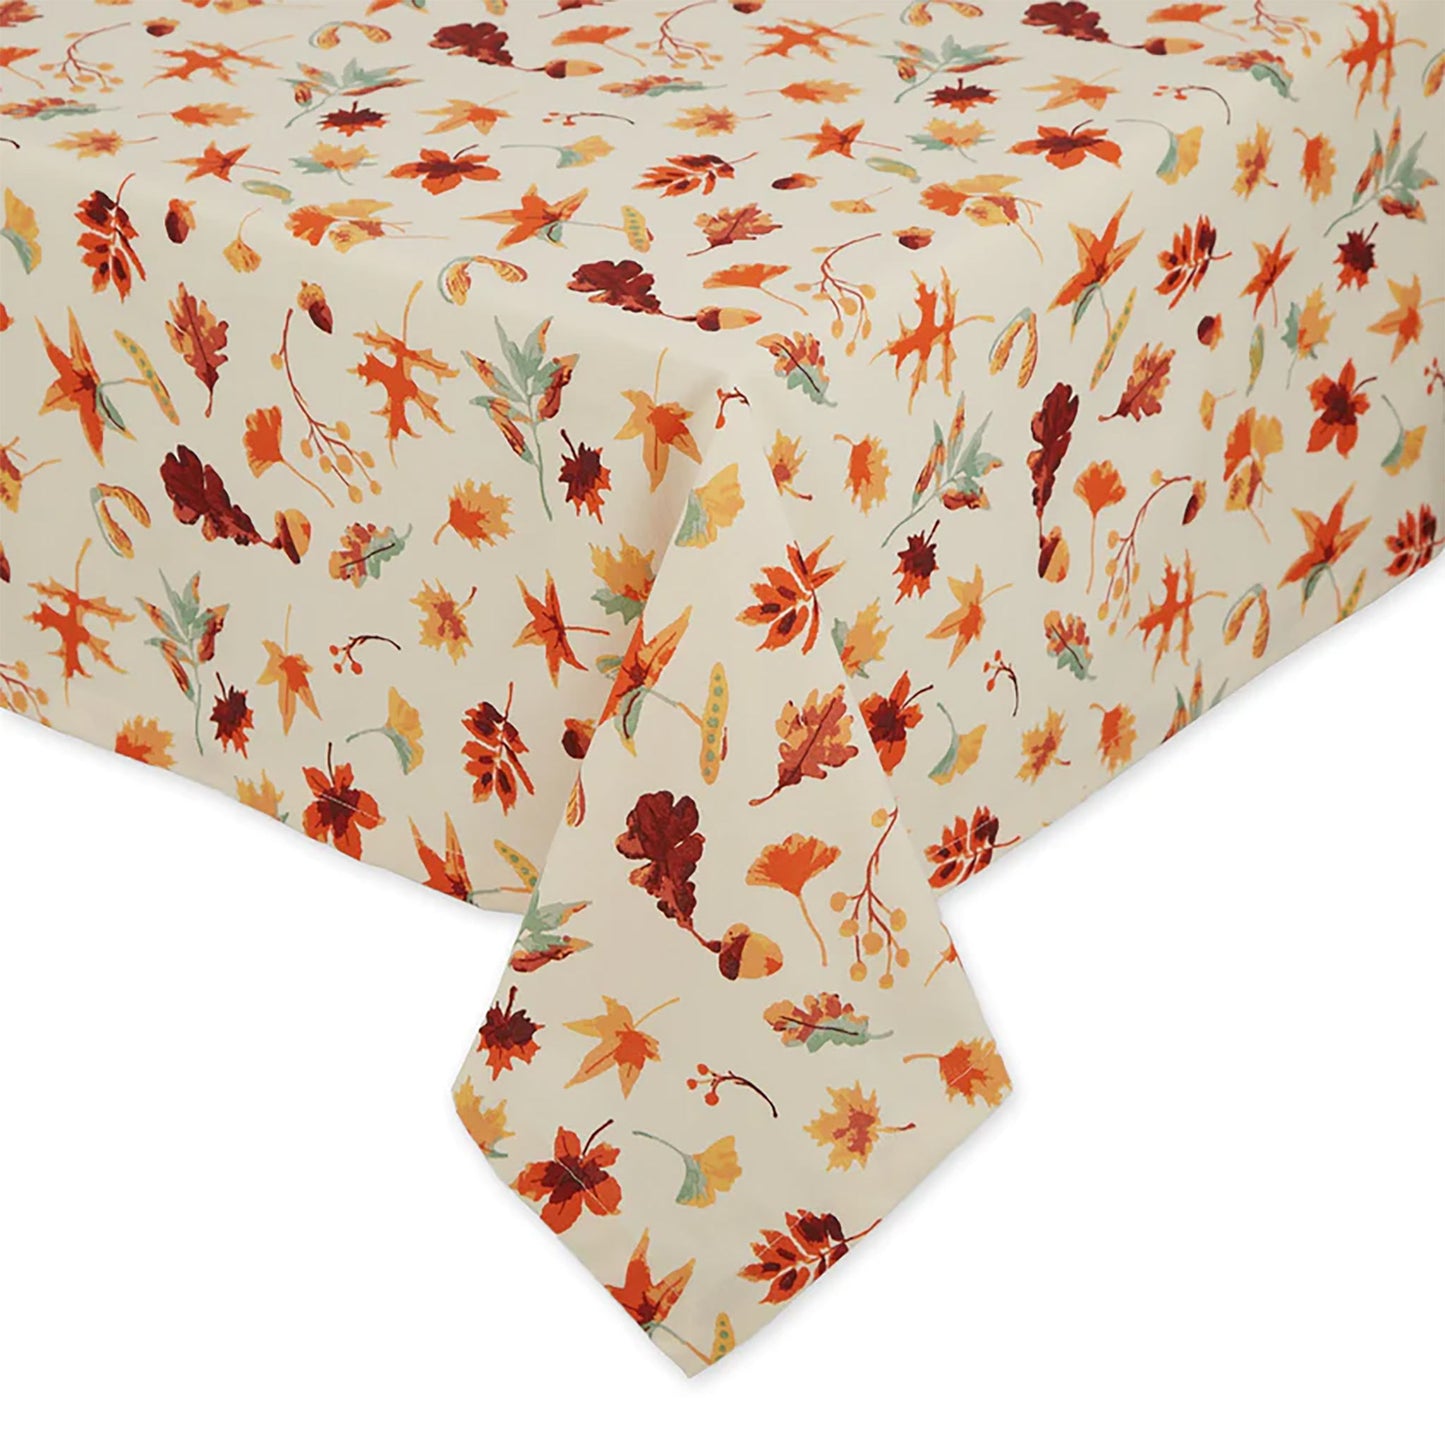 Falling Leaves Tablecloth-52" x 52"